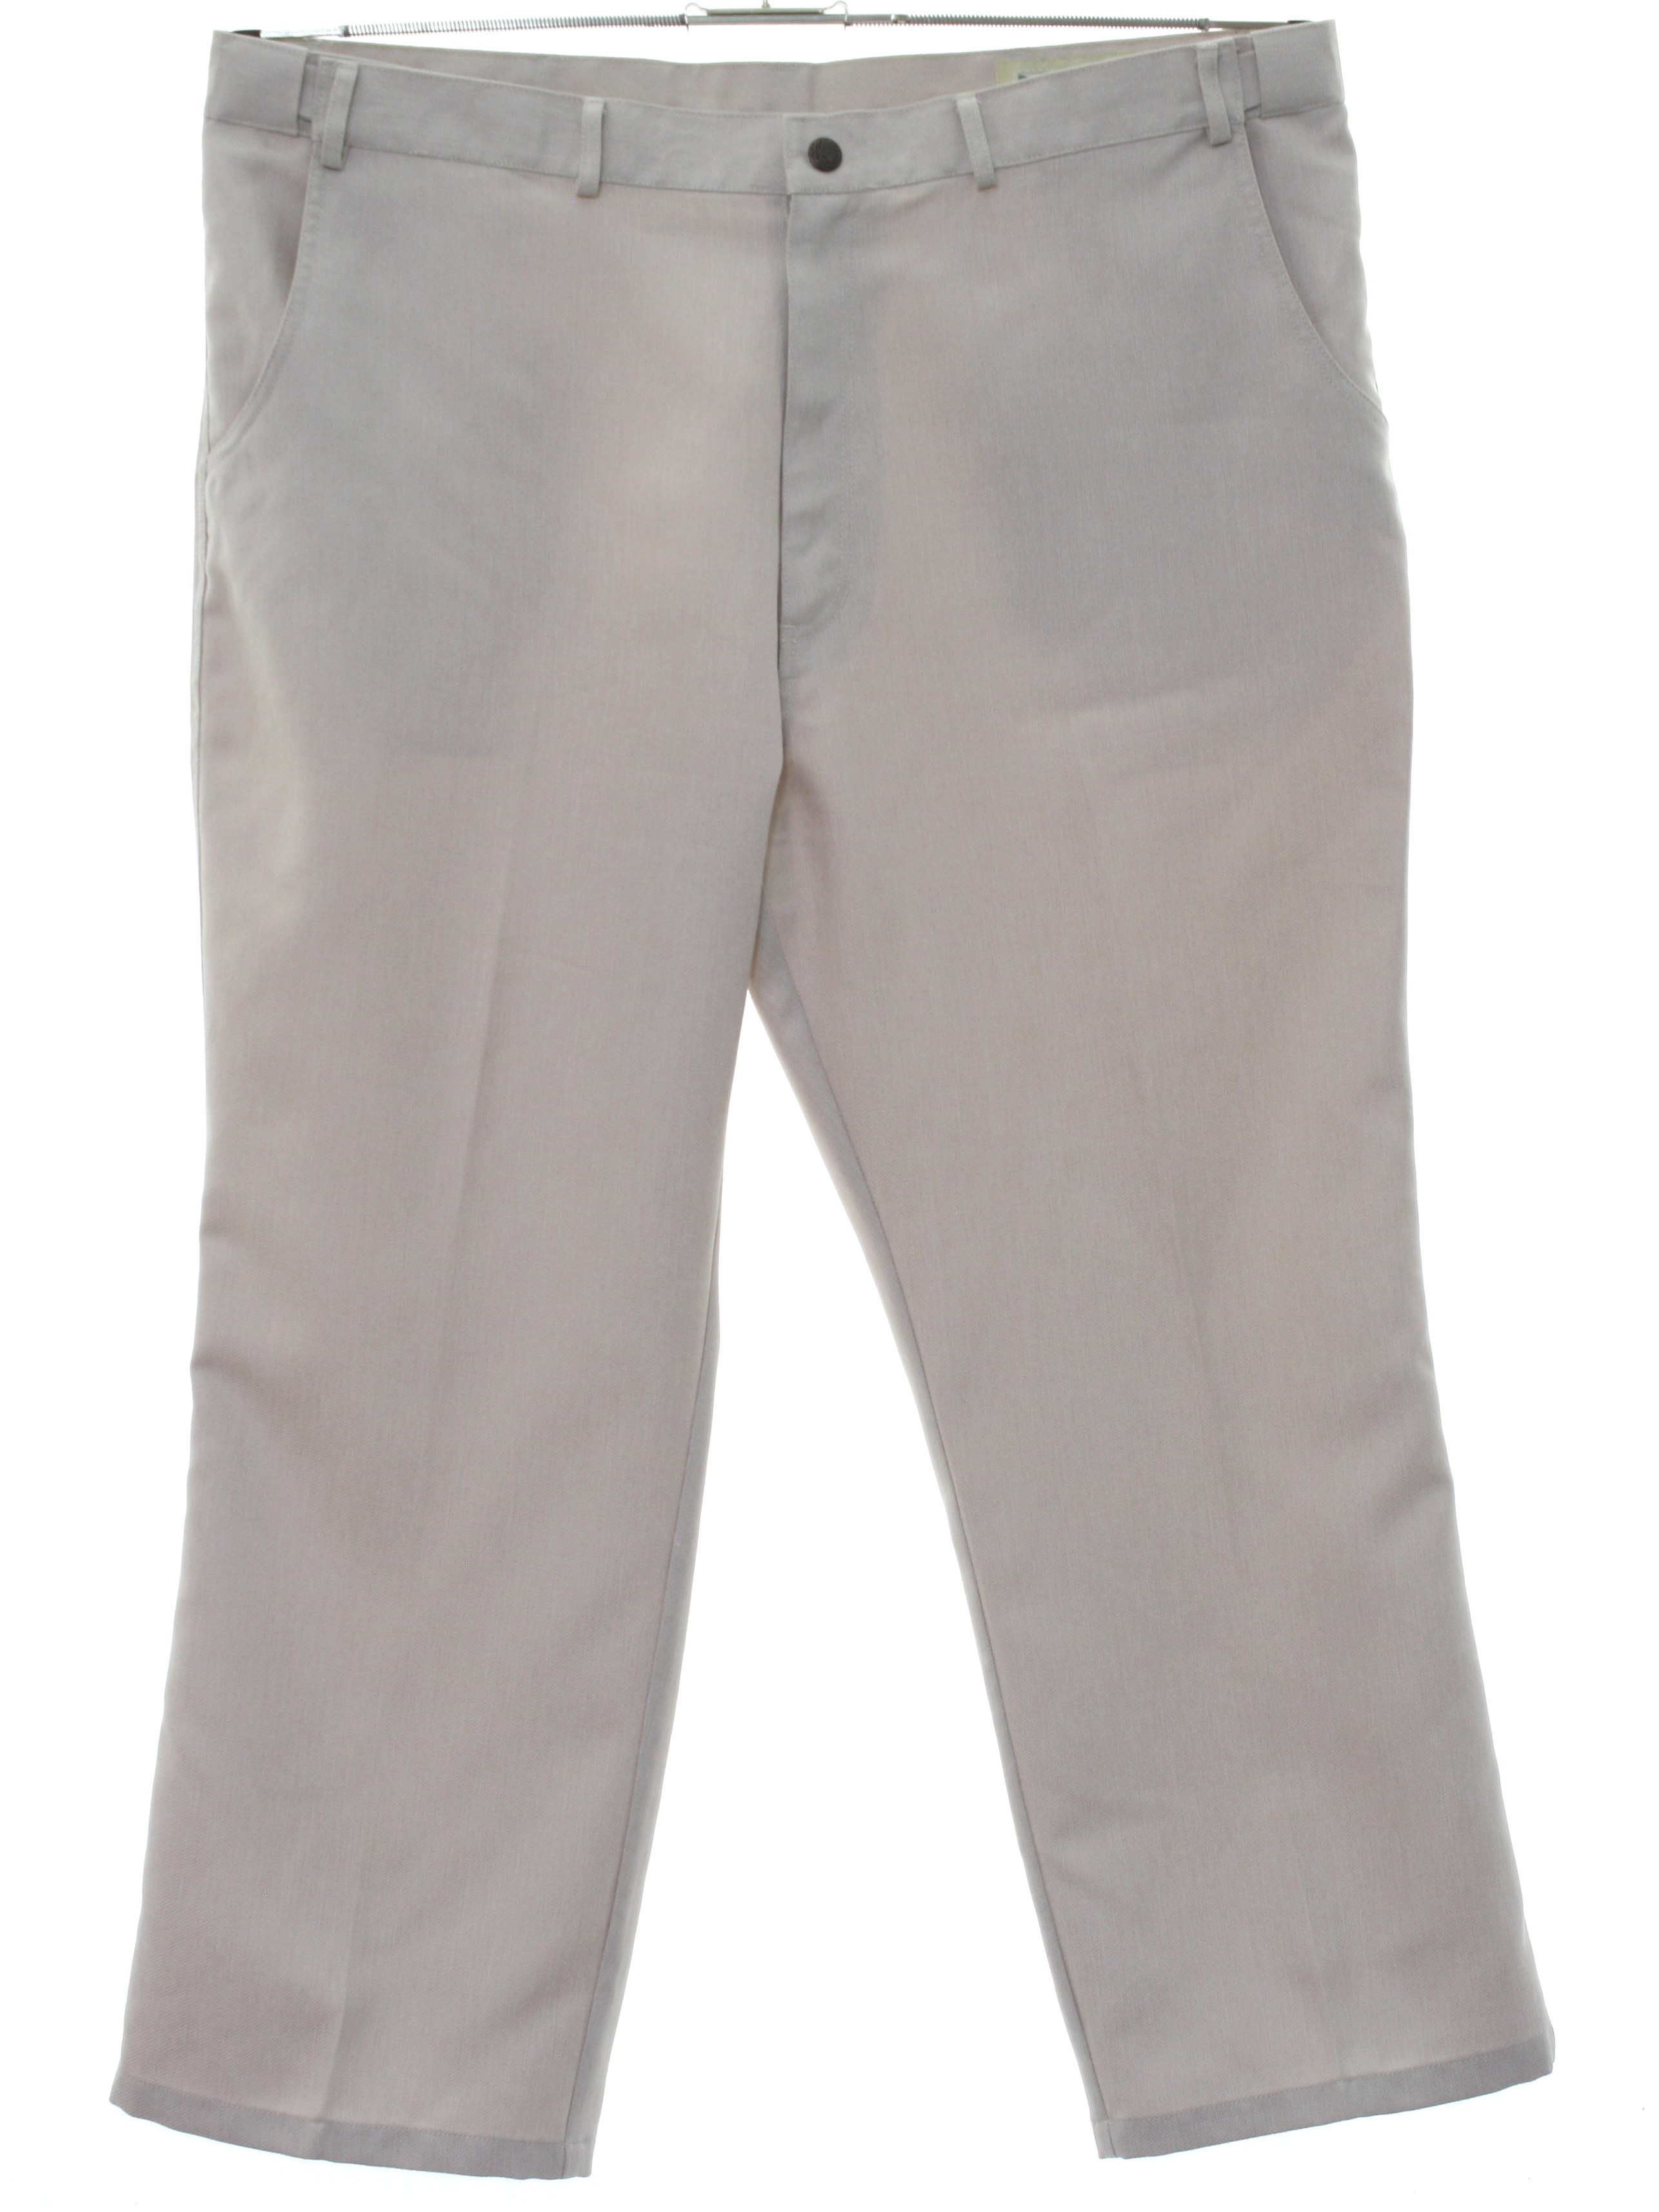 Pants: 90s -Haband- Mens light cream tan solid colored polyester ...